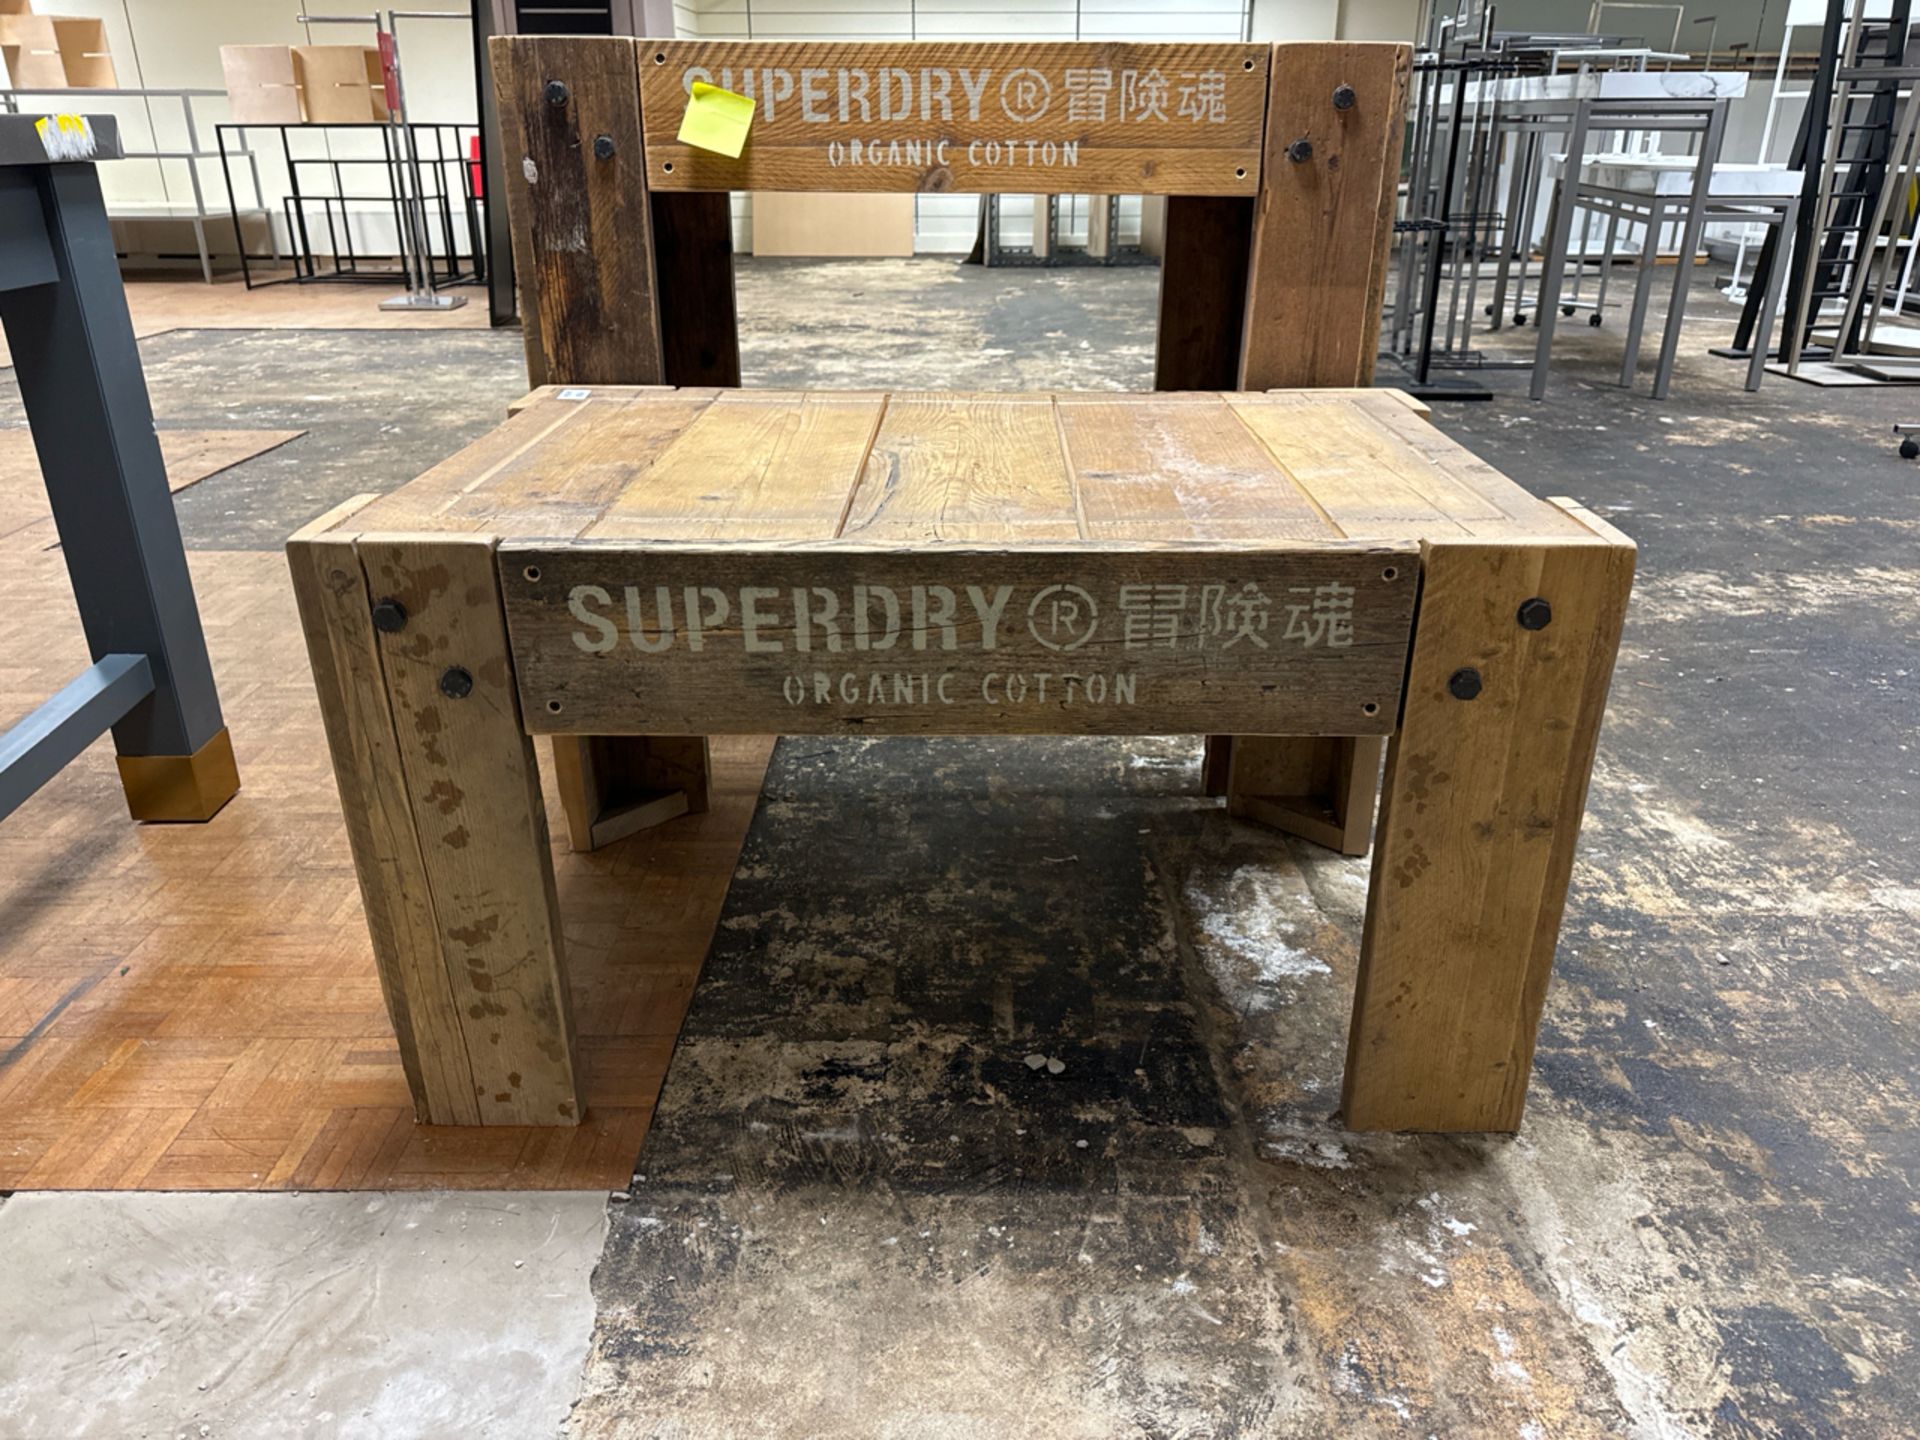 Pair Of Superdry Branded Wooden Tables - Image 2 of 4